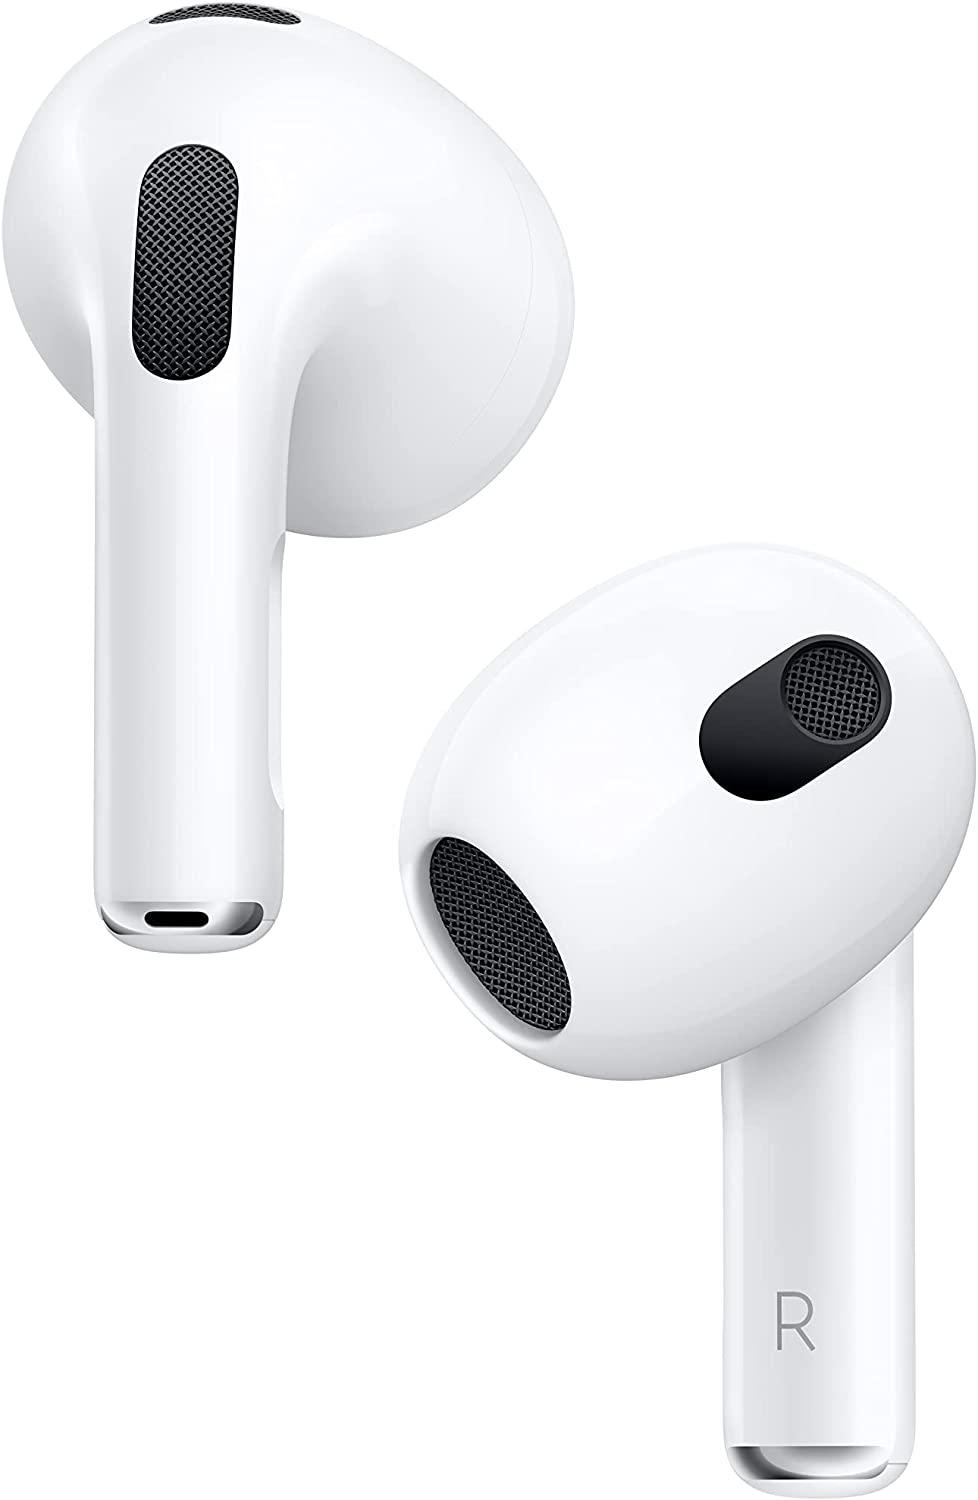 3 things that make me think the AirPods 3 aren't such a great value after all